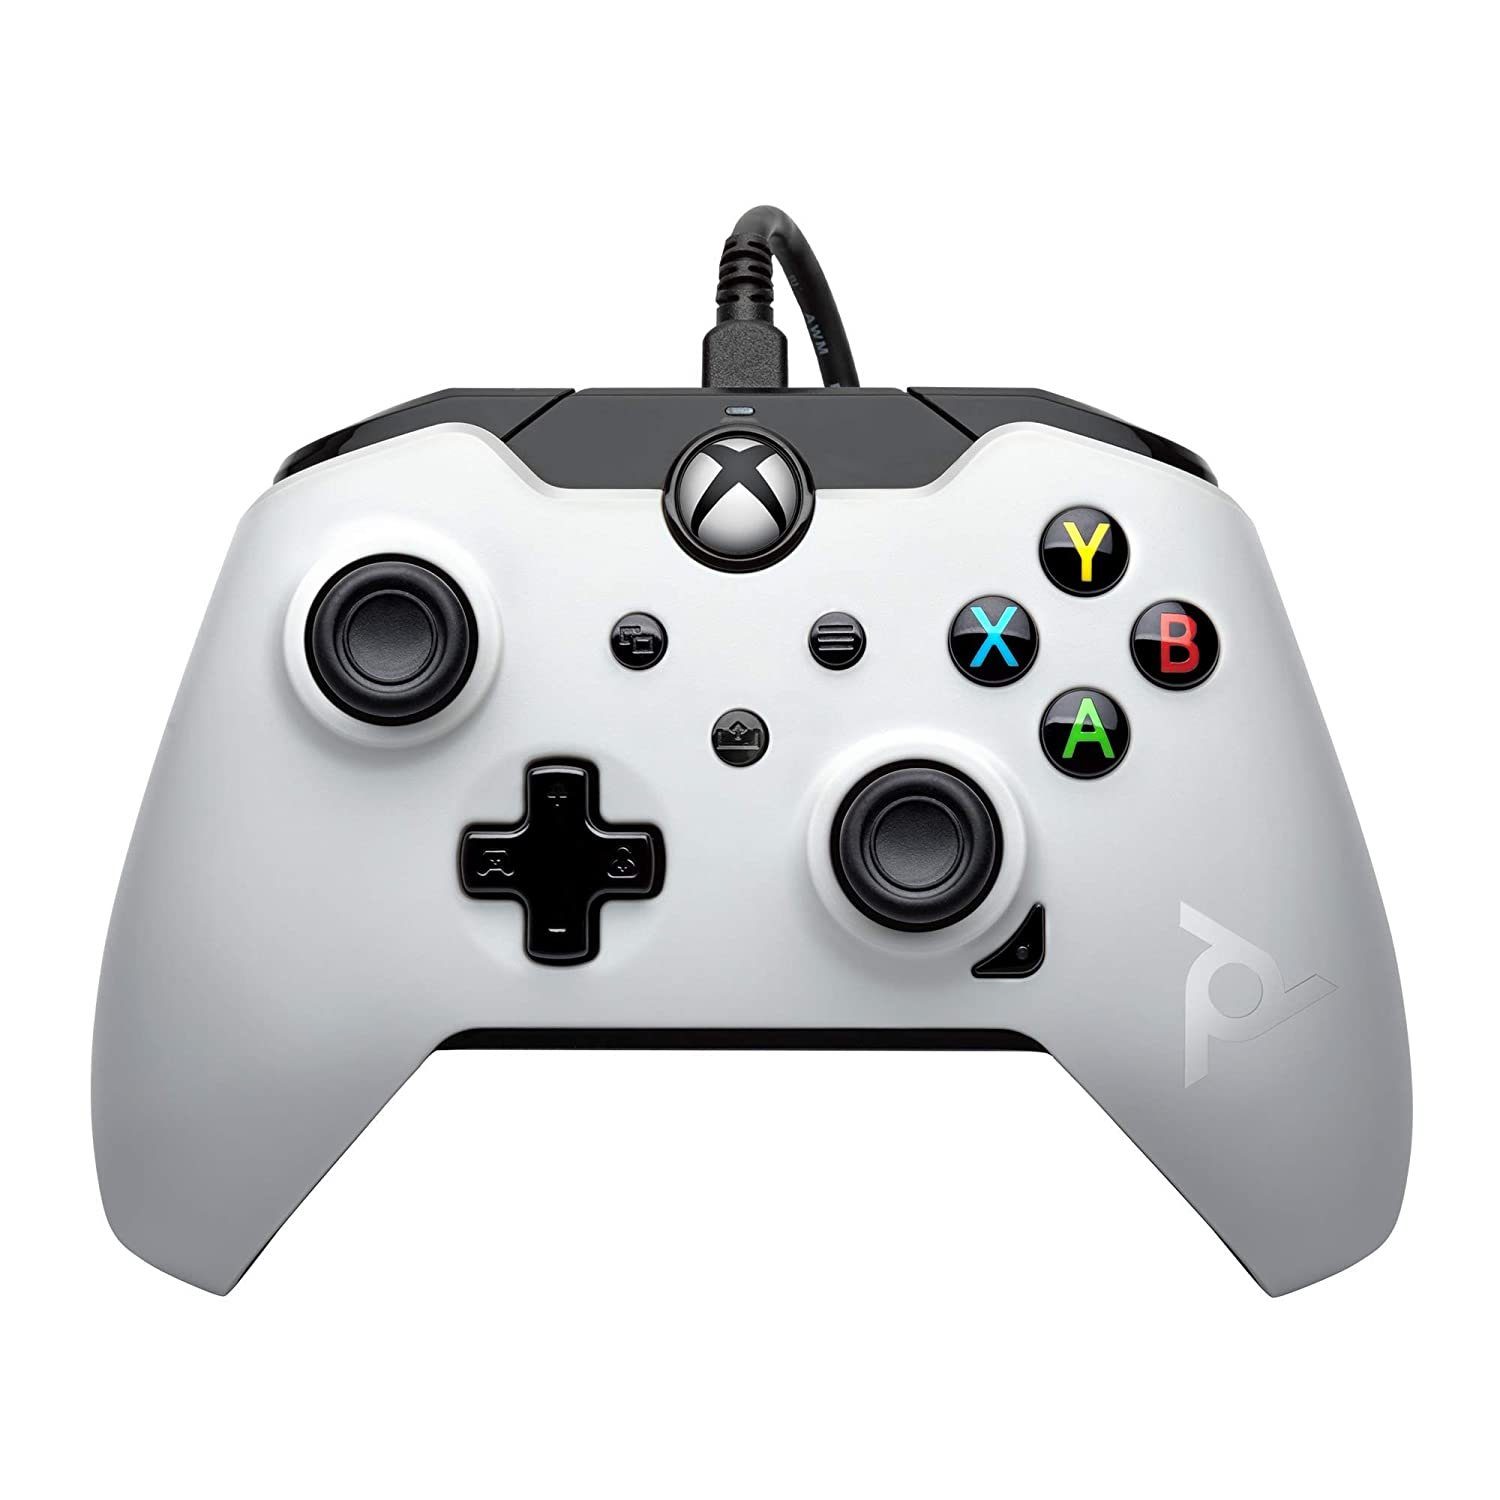 pdp PDP Wired Controller Gamepad für Xbox, PC, Anschlusstyp: Kabel Xbox-Controller